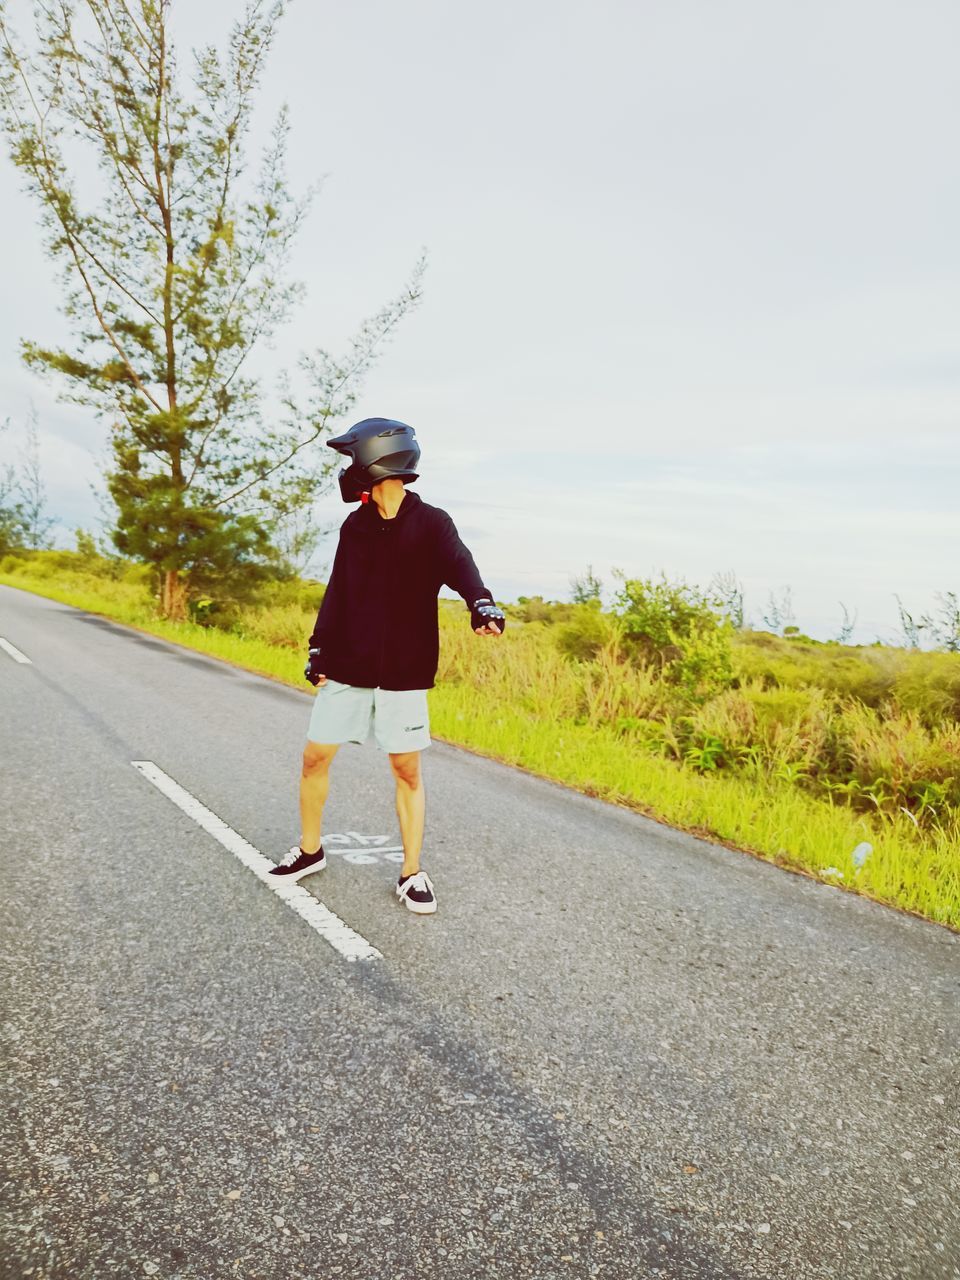 road, one person, full length, transportation, day, sky, nature, casual clothing, clothing, leisure activity, lifestyles, yellow, plant, child, childhood, motion, rear view, asphalt, longboard, the way forward, tree, adult, outdoors, on the move, road marking, sports, walking, person, copy space, city, hat, men, footwear, street, women, sunlight, standing, skateboarding equipment, running, symbol